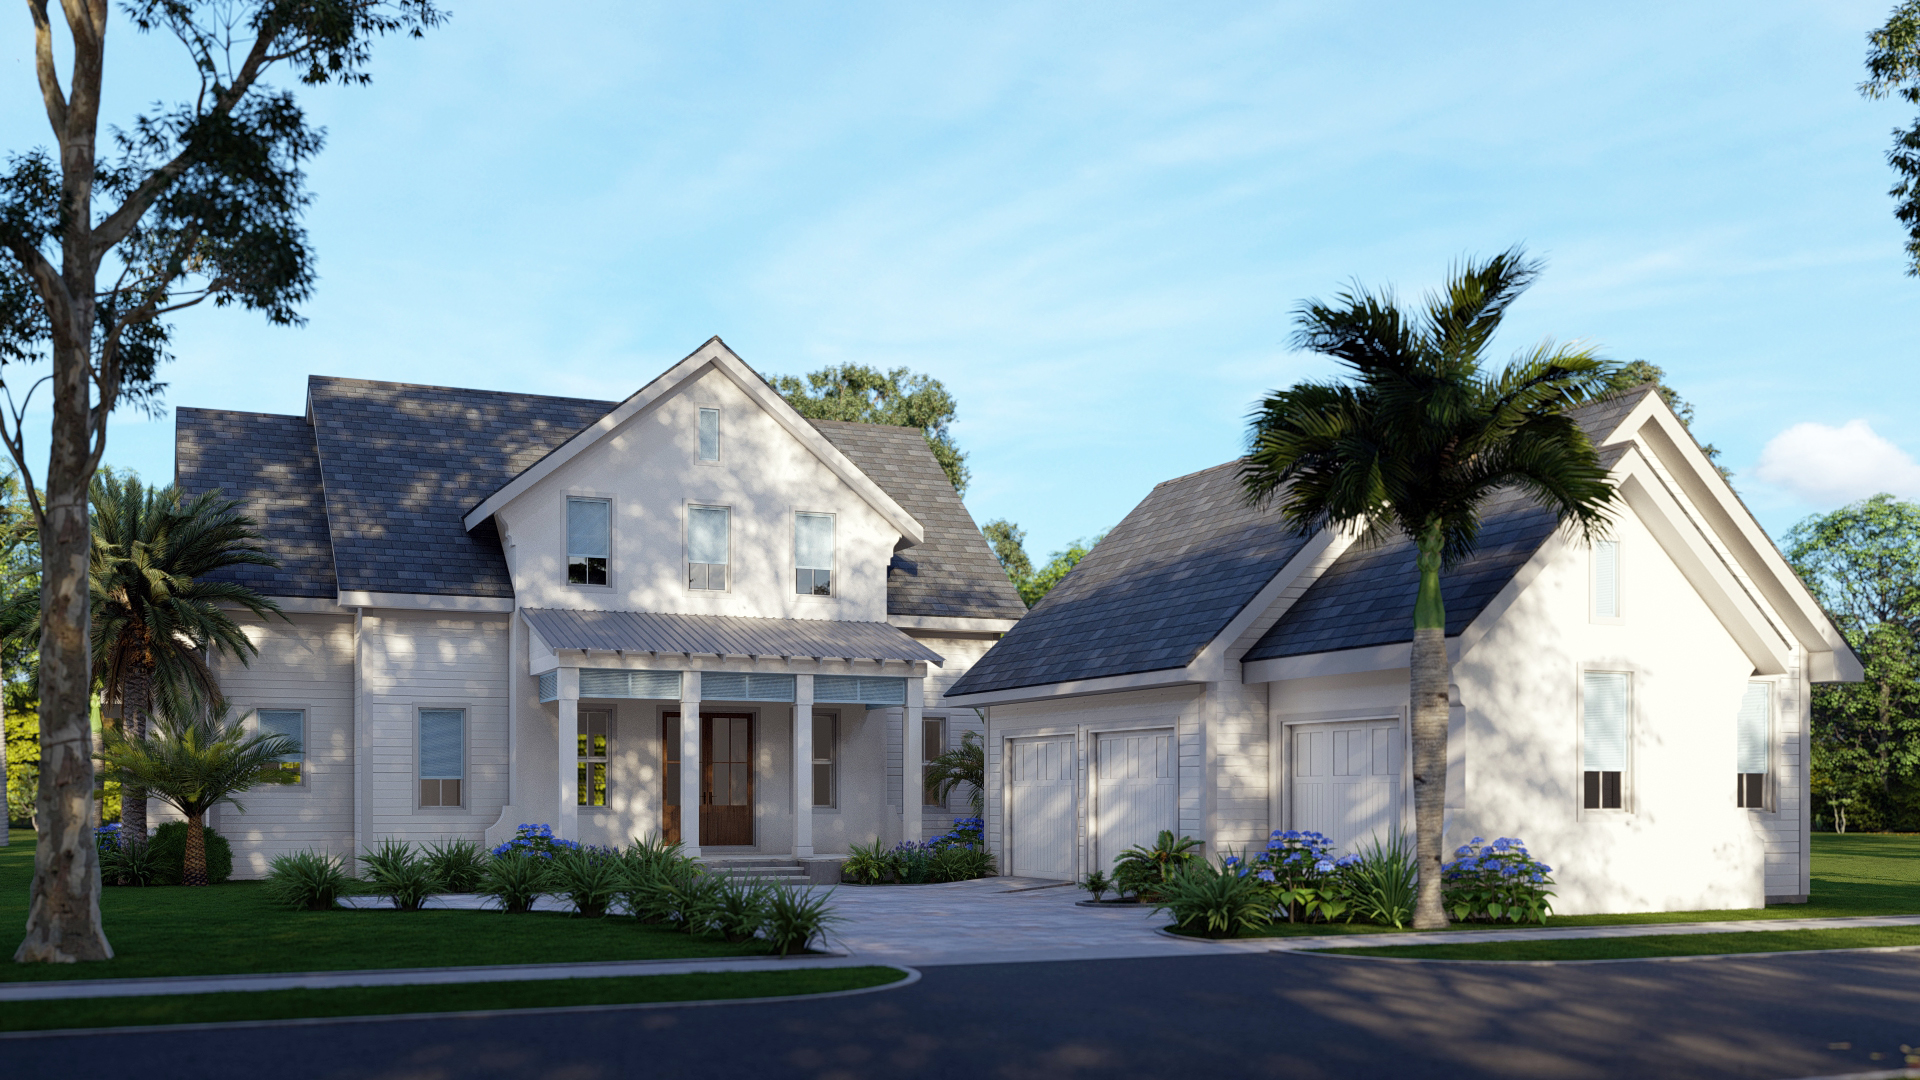 Whistling Palm - 2 Story House Plans in FL